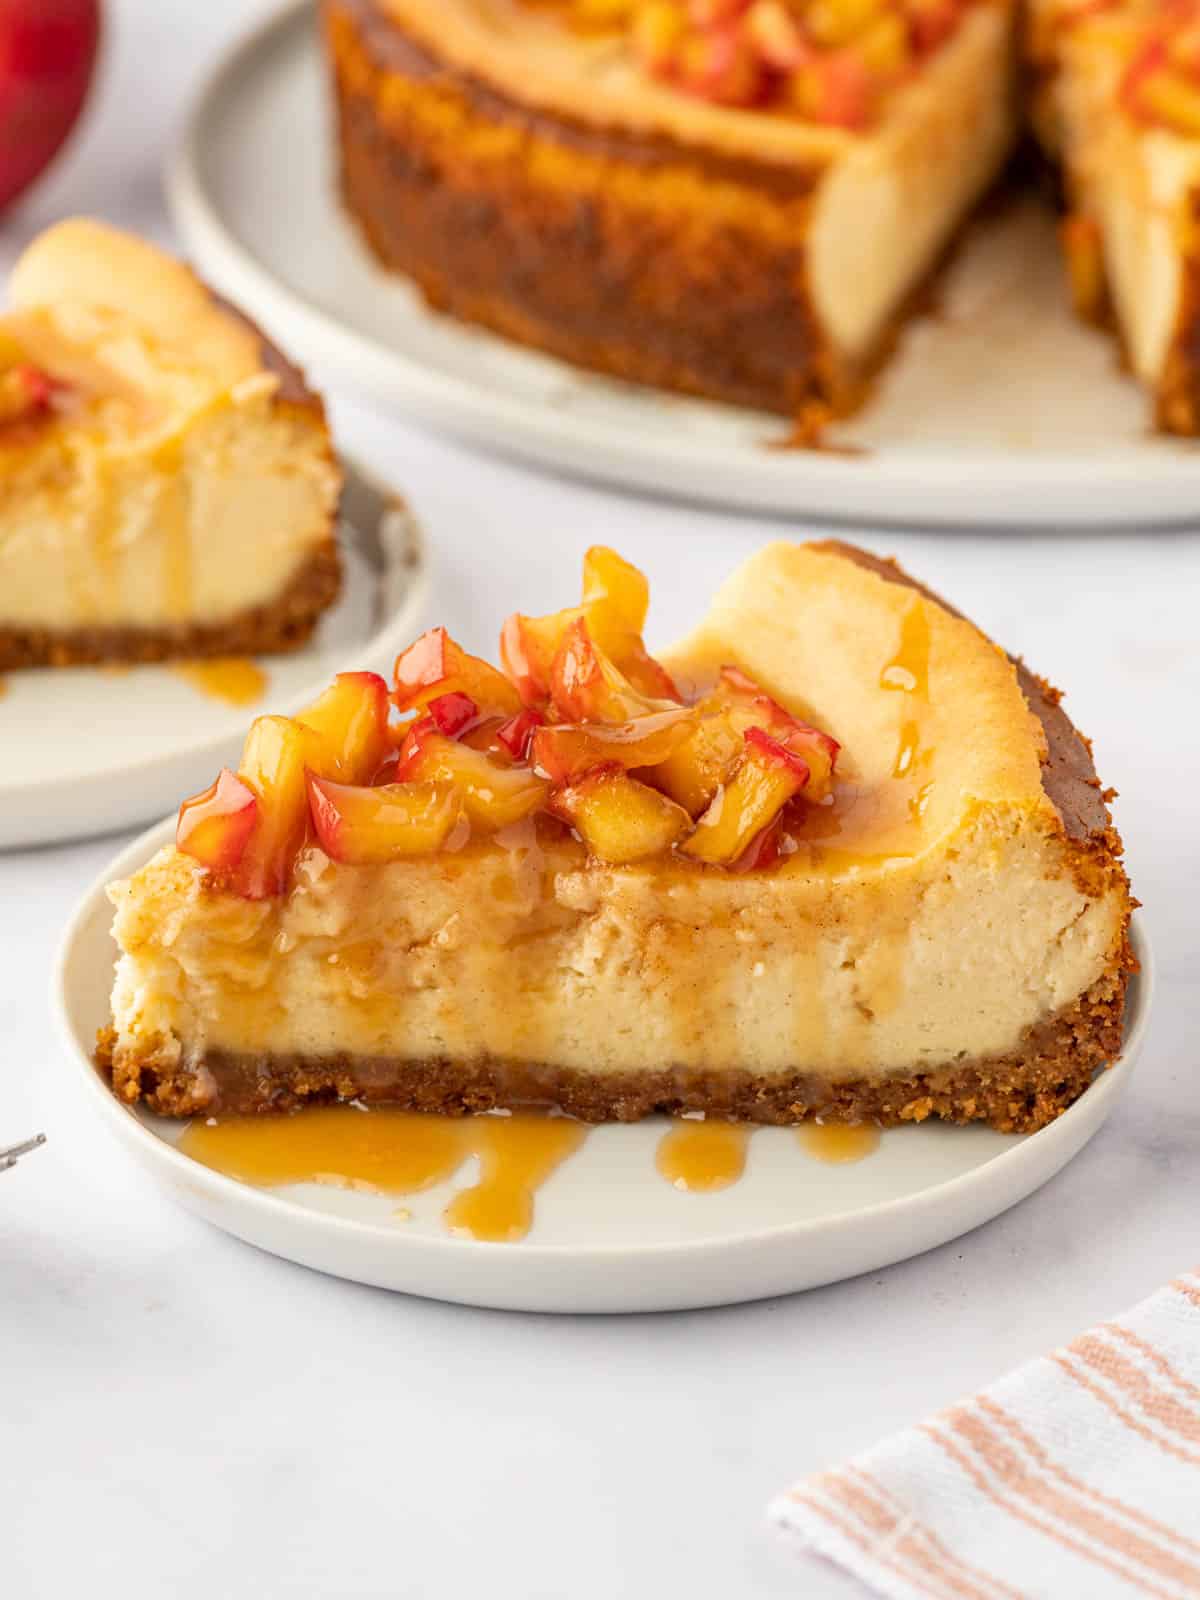 A slice of cinnamon cheesecake with apple topping rests on a plate.